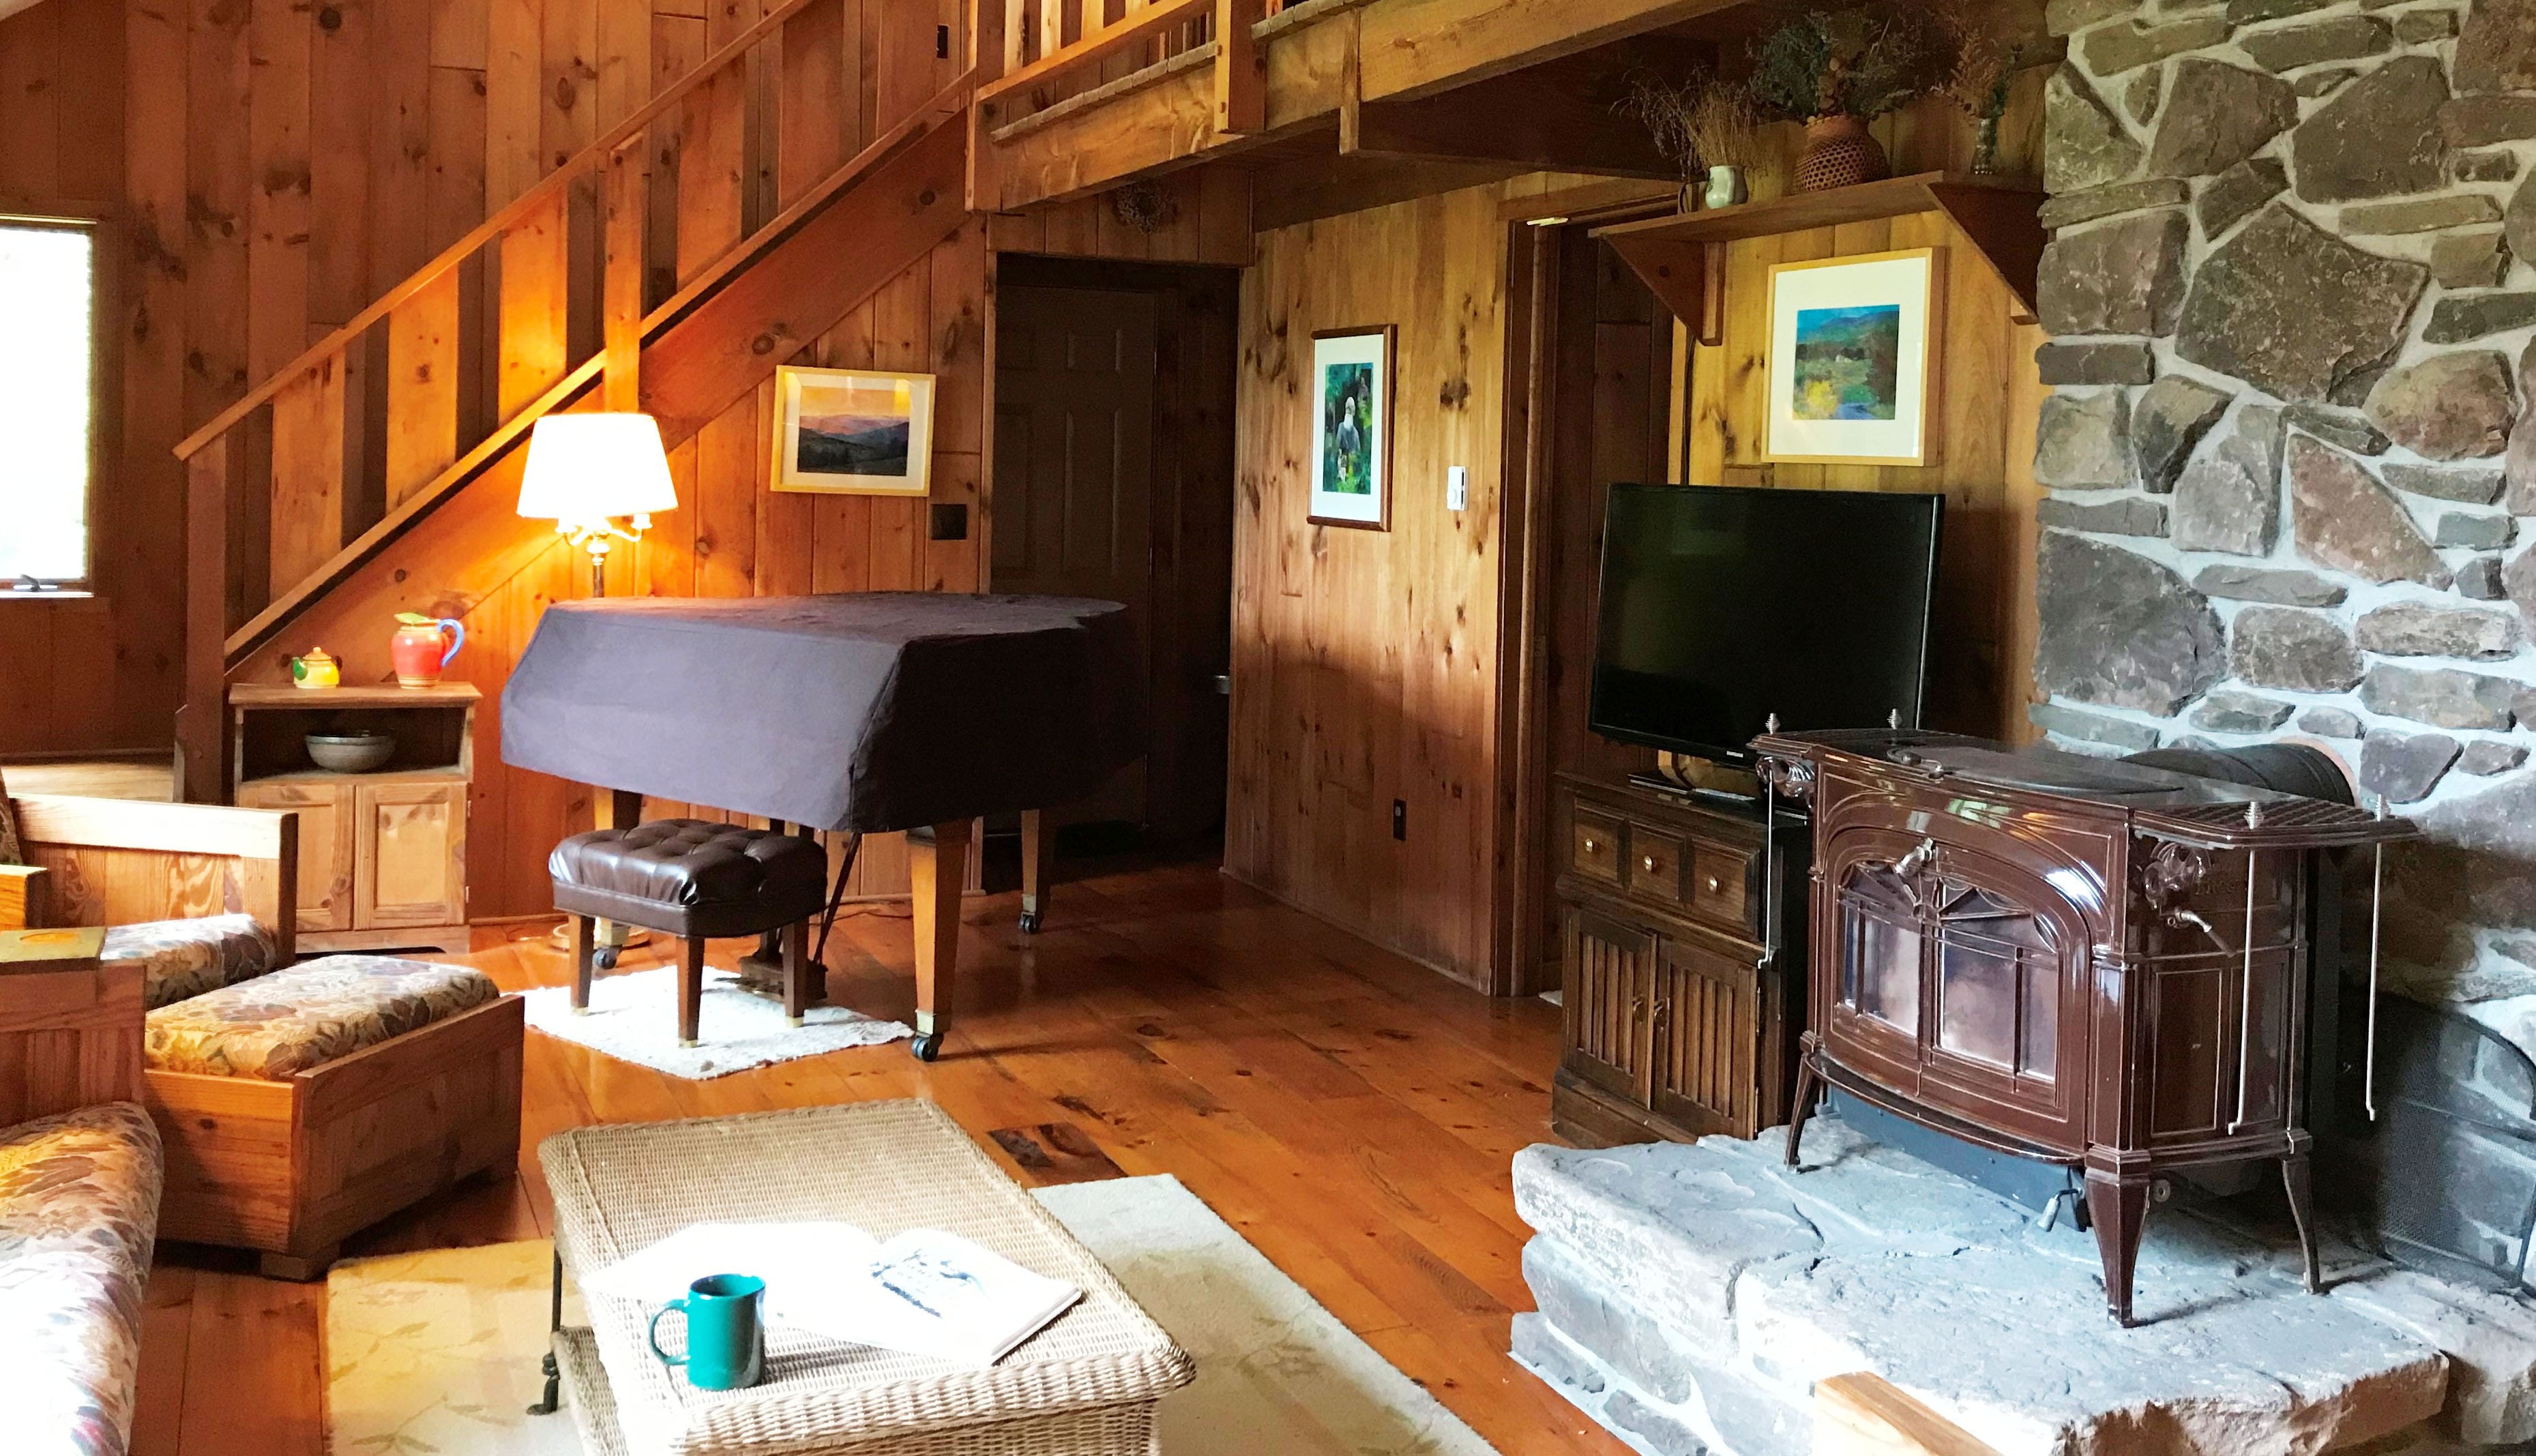 Living Space with TV, woodstove, and piano1